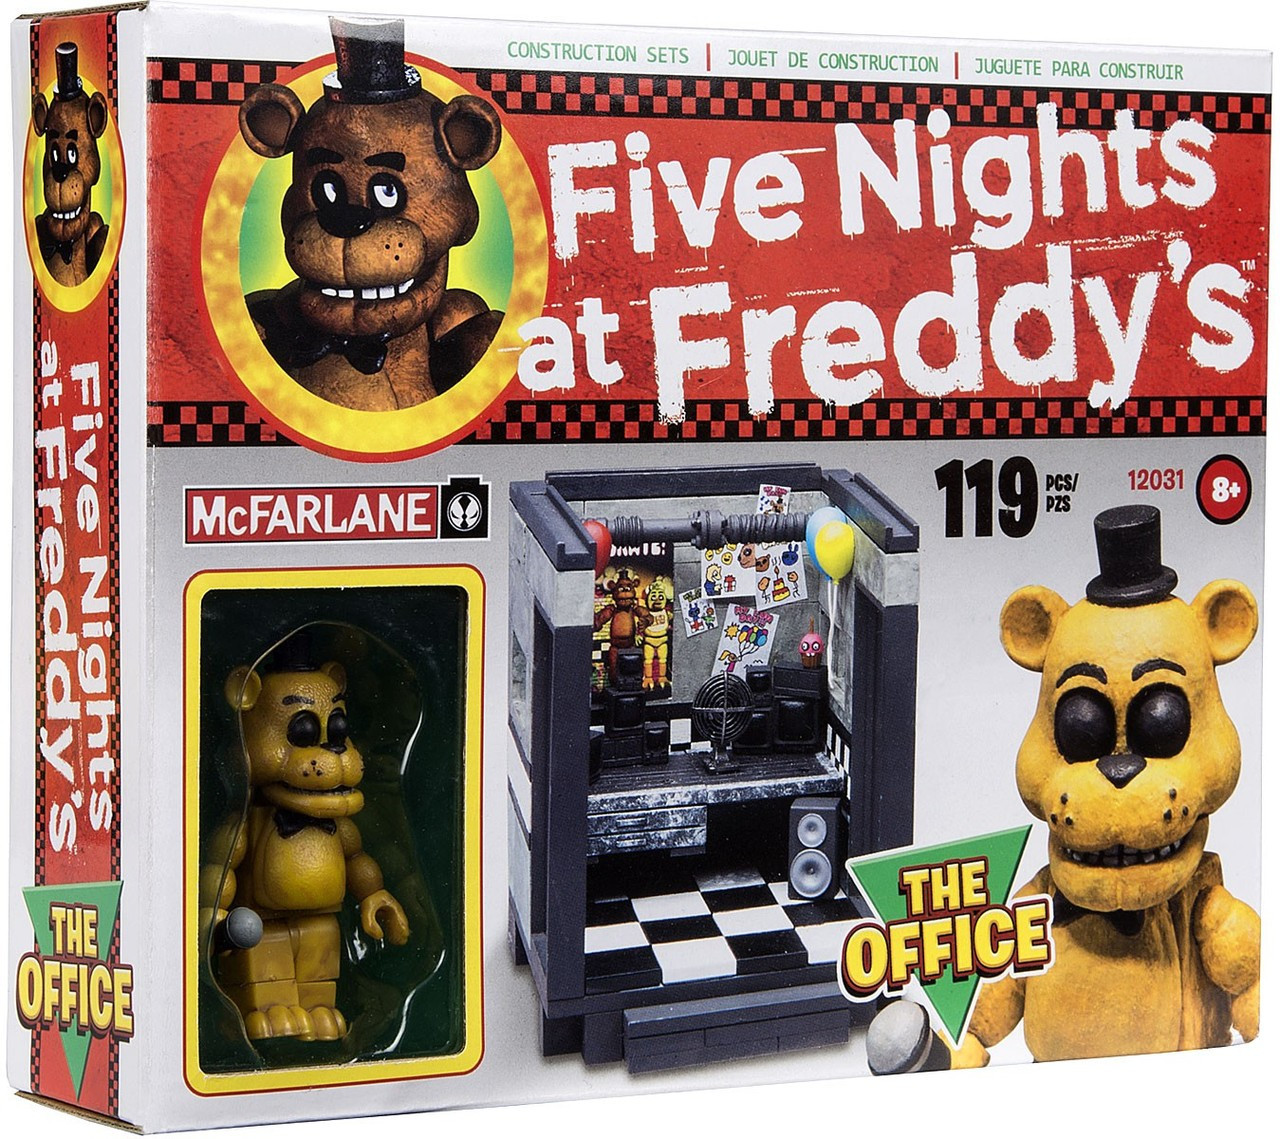 mcfarlane-toys-five-nights-at-freddys-the-office-exclusive-construction